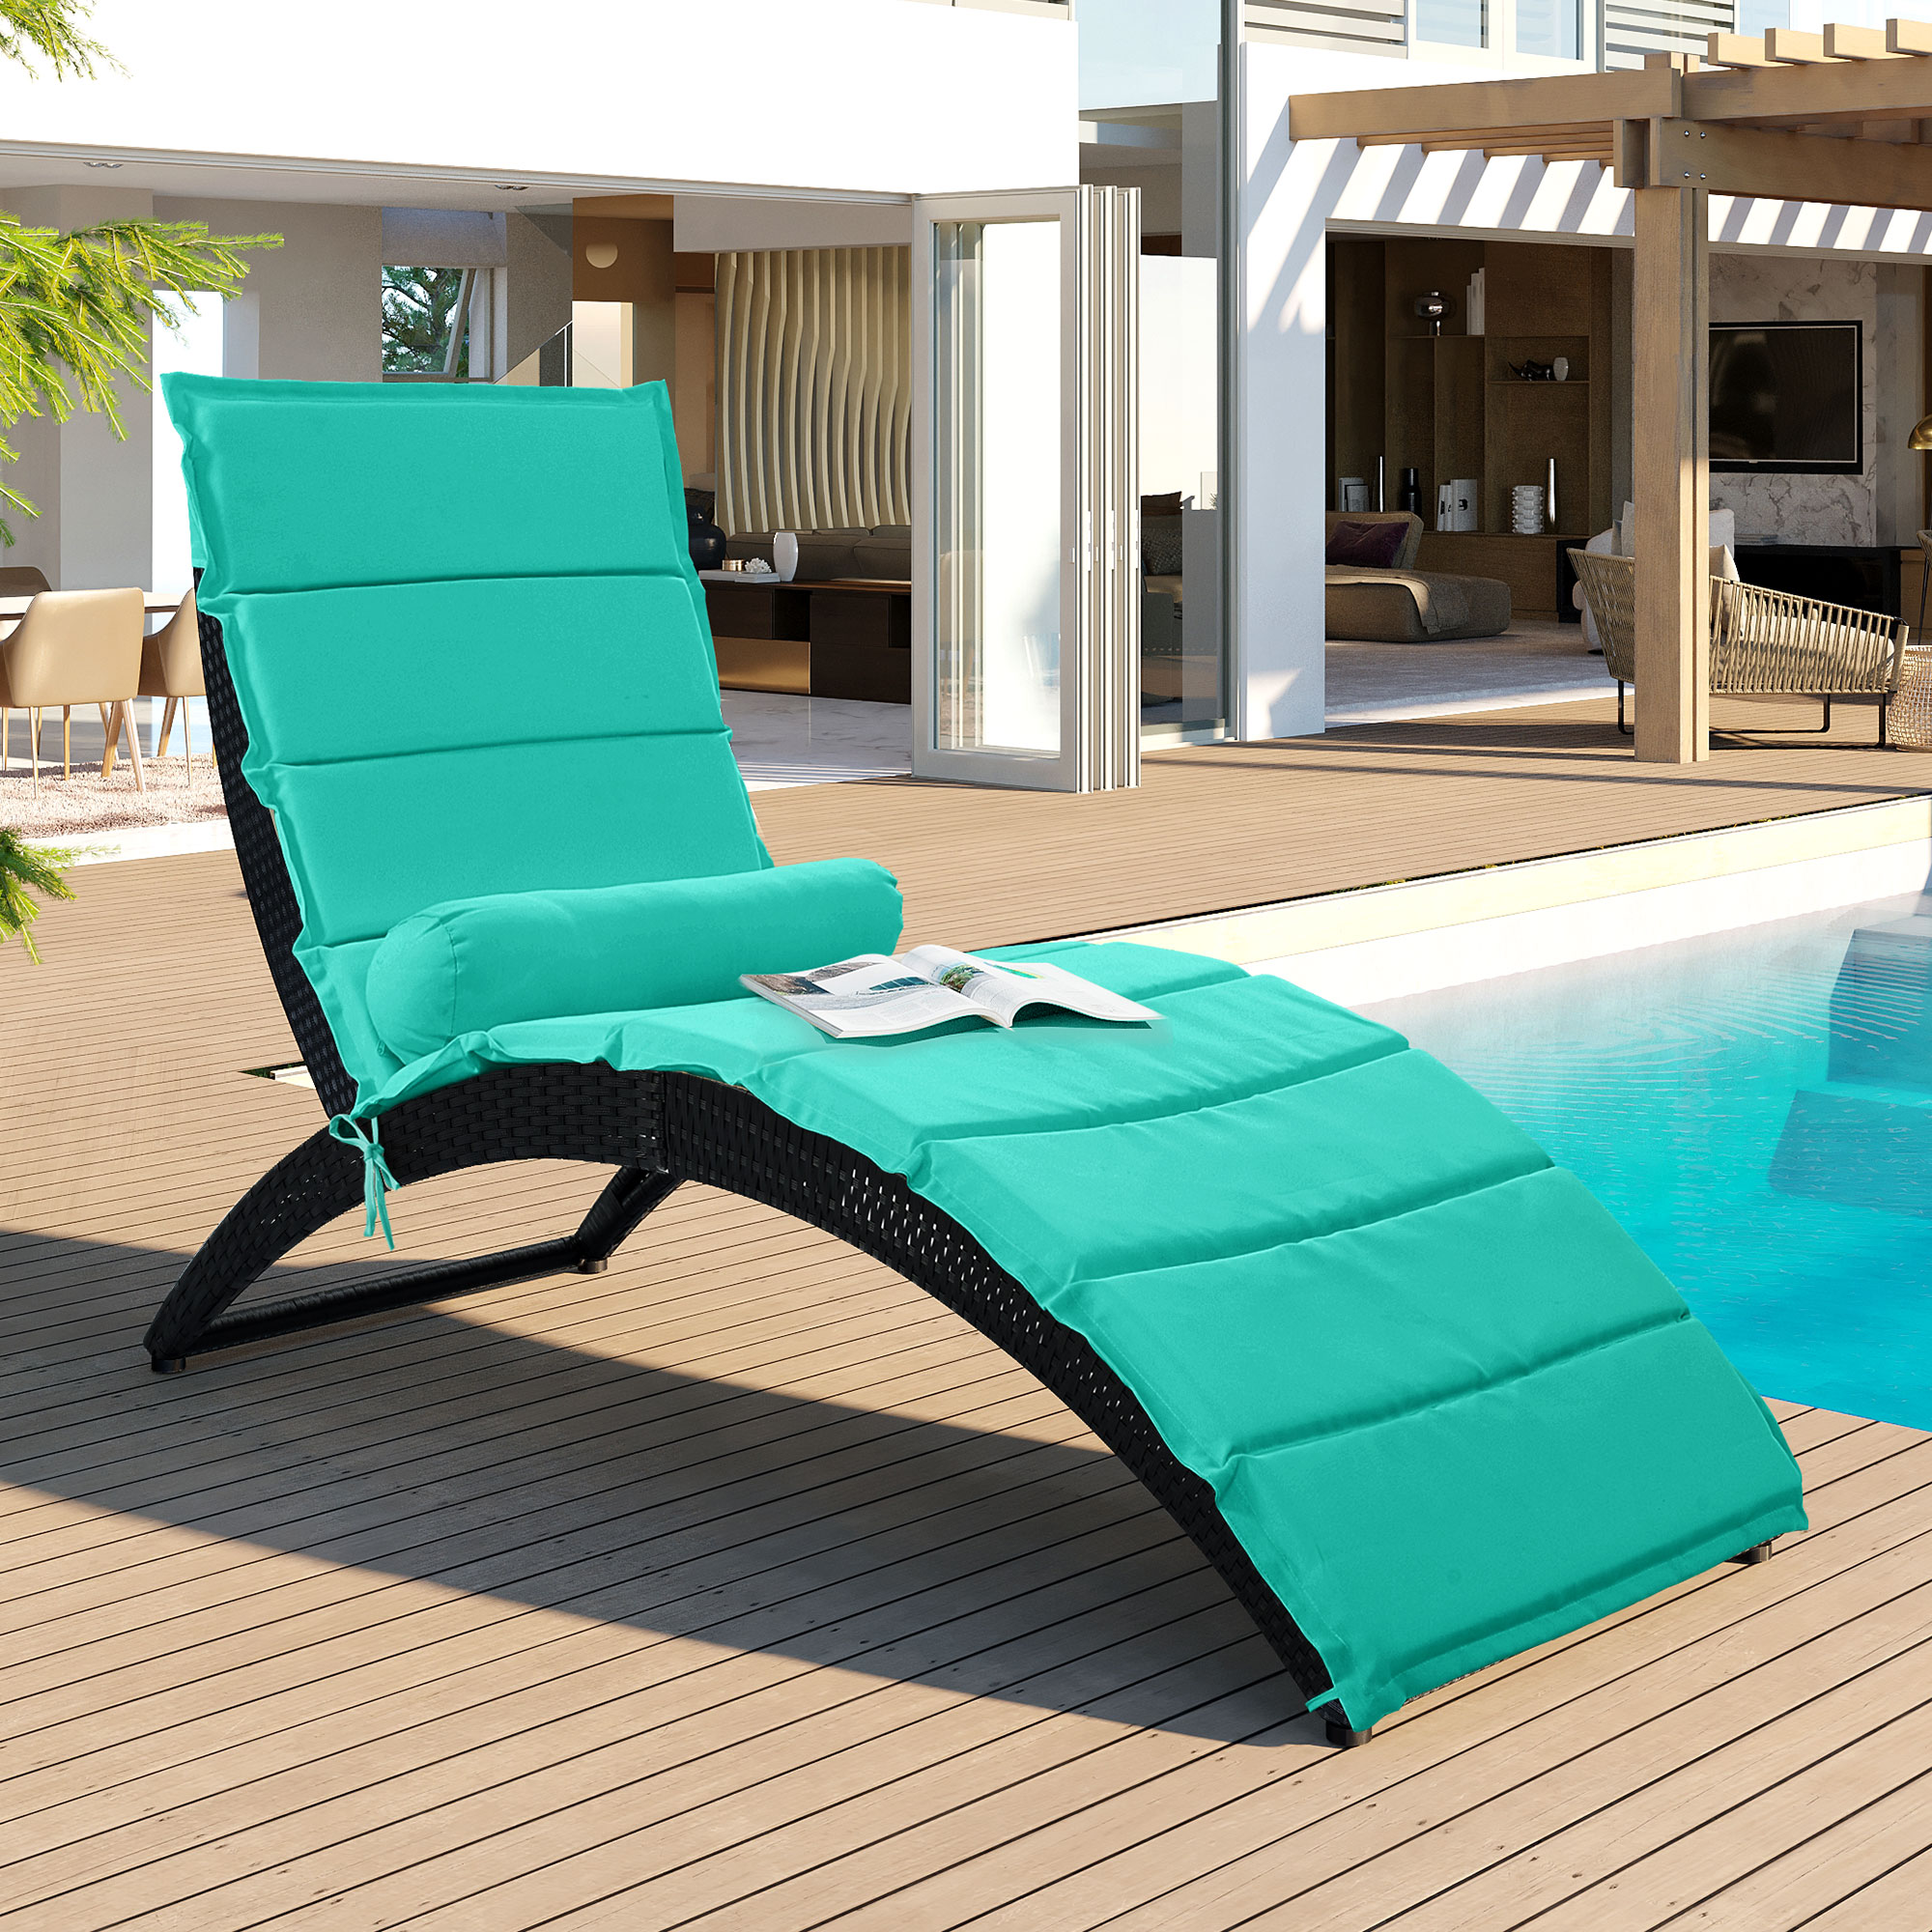 Lounge Chair Outdoor, Foldable Outdoor Chaise Lounge, Patio Wicker Sun Lounger with Removable Cushion and Bolster Pillow for Poolside Deck Porch Garden, 1 Set, Blue - image 1 of 12